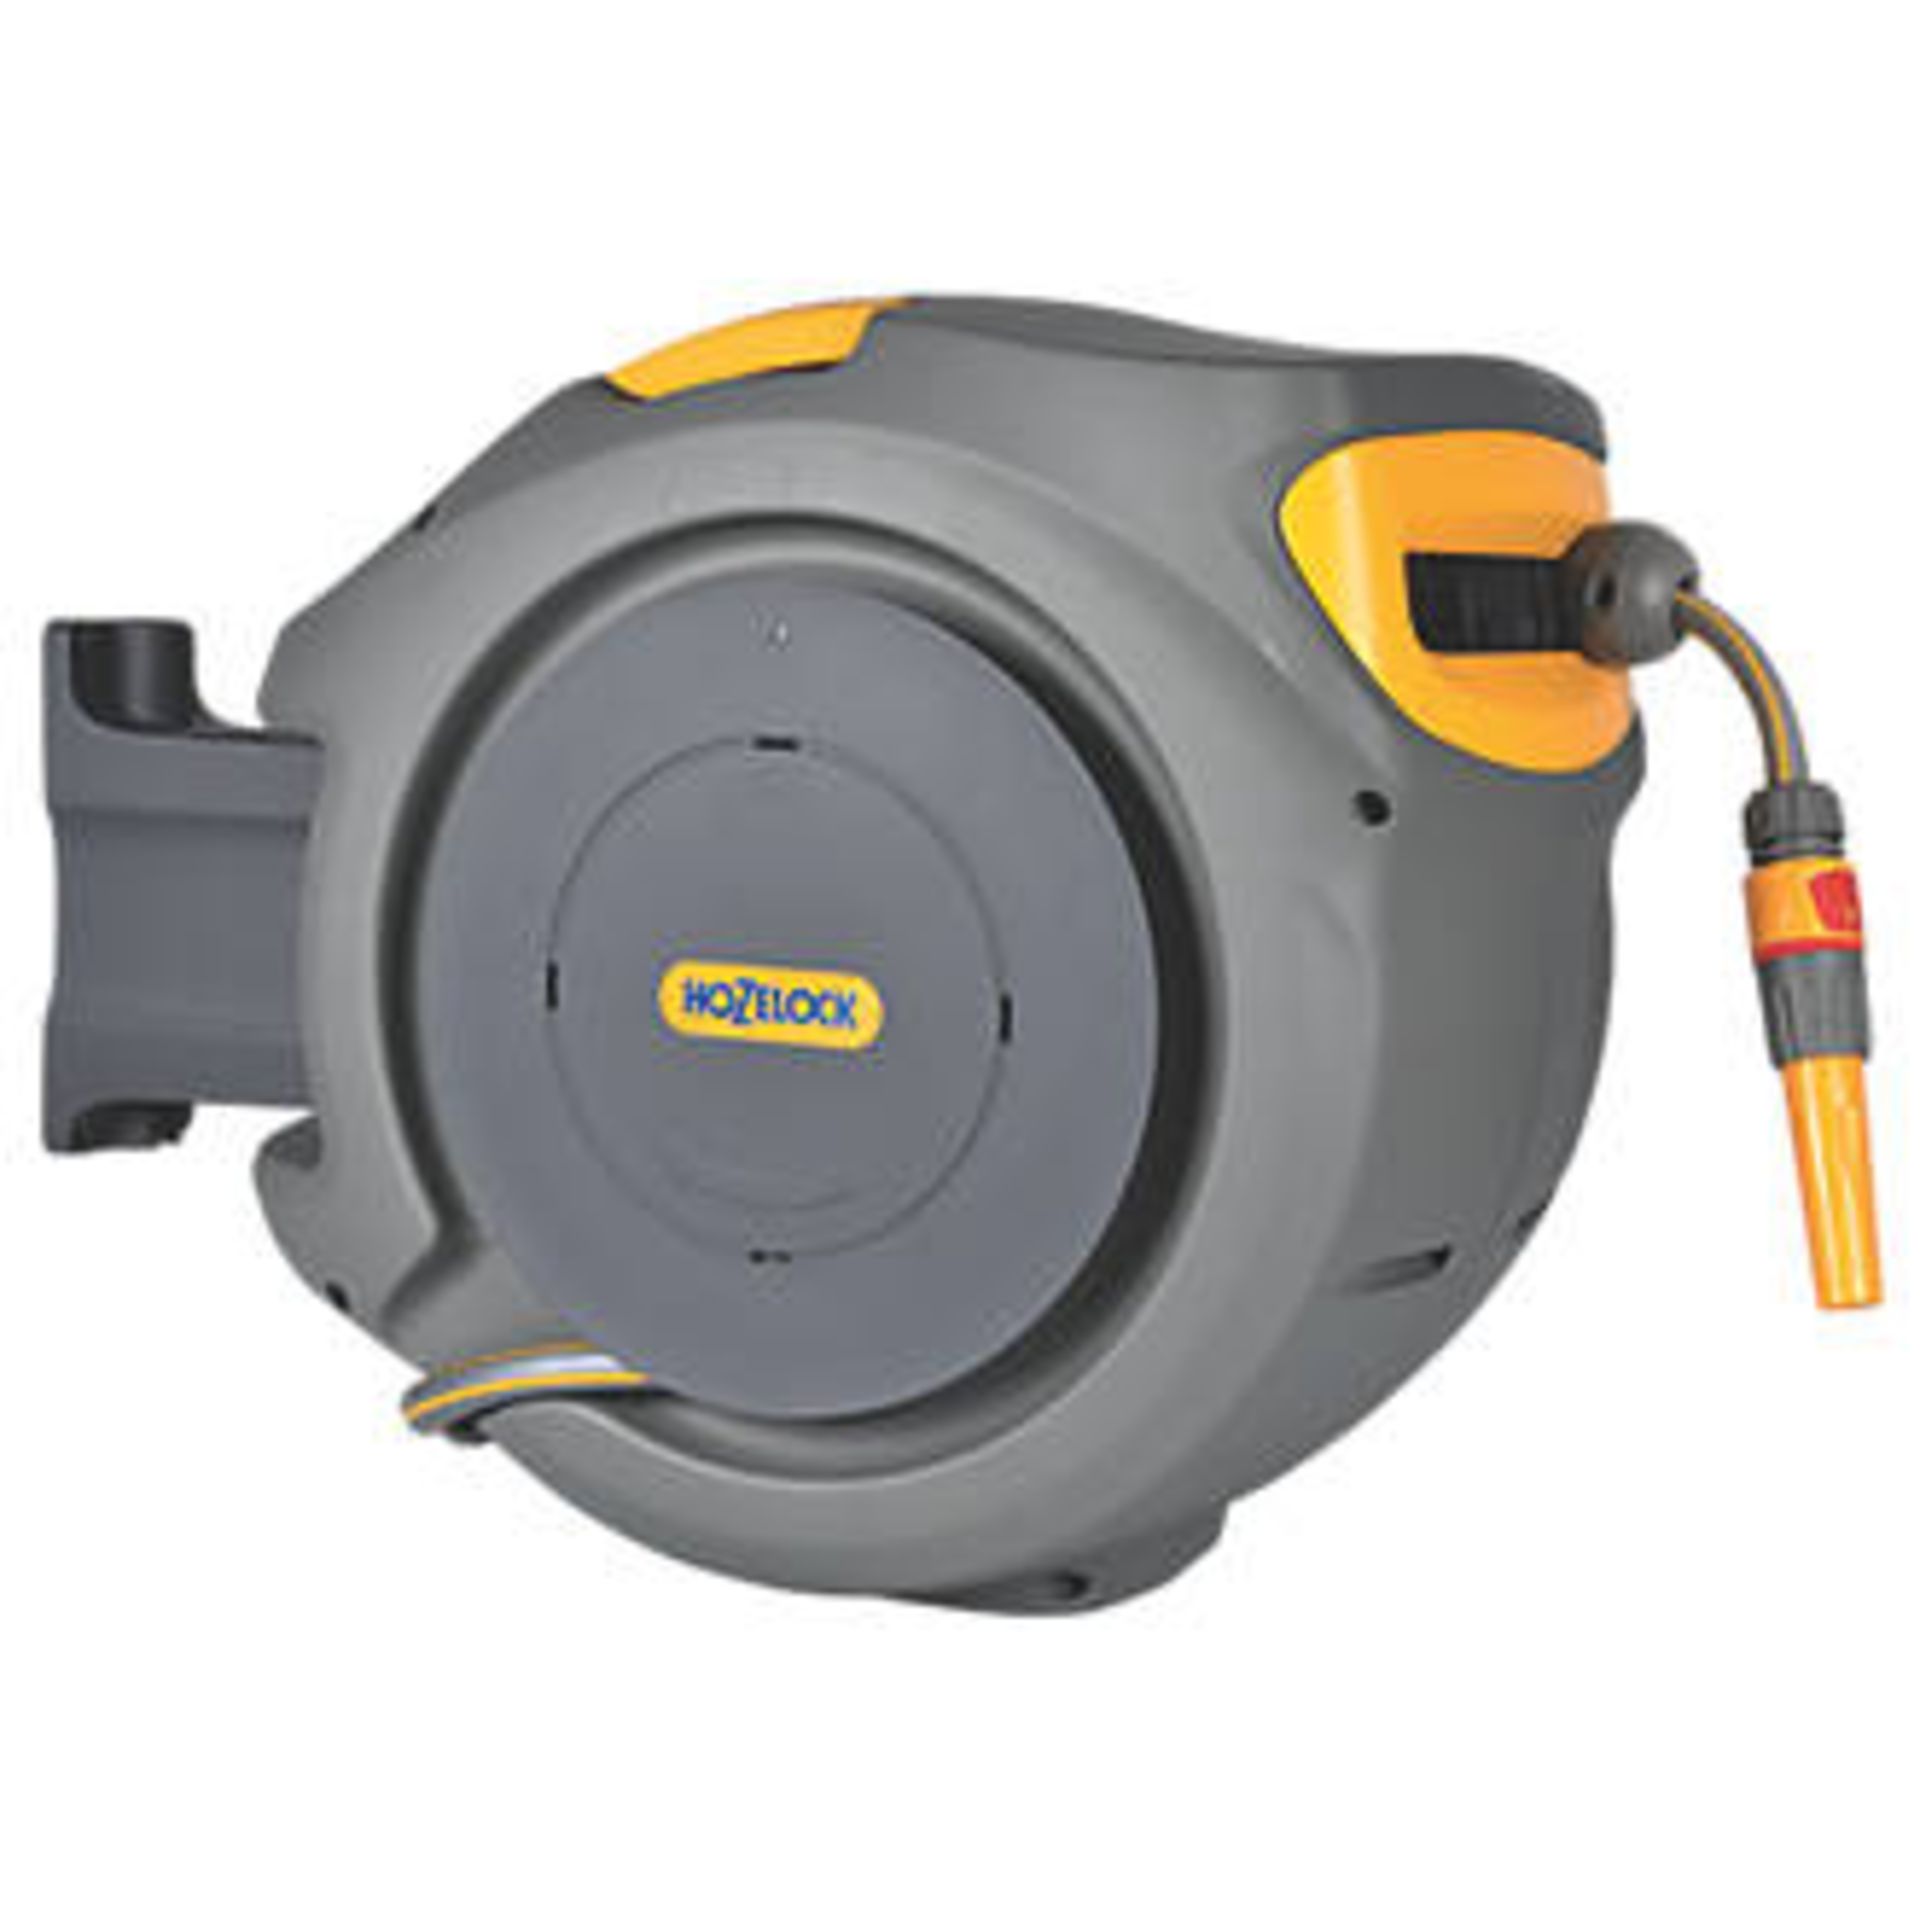 BQ HOZELOCK 30M AUTO REEL Â£118.15Condition ReportAppraisal Available on Request- All Items are